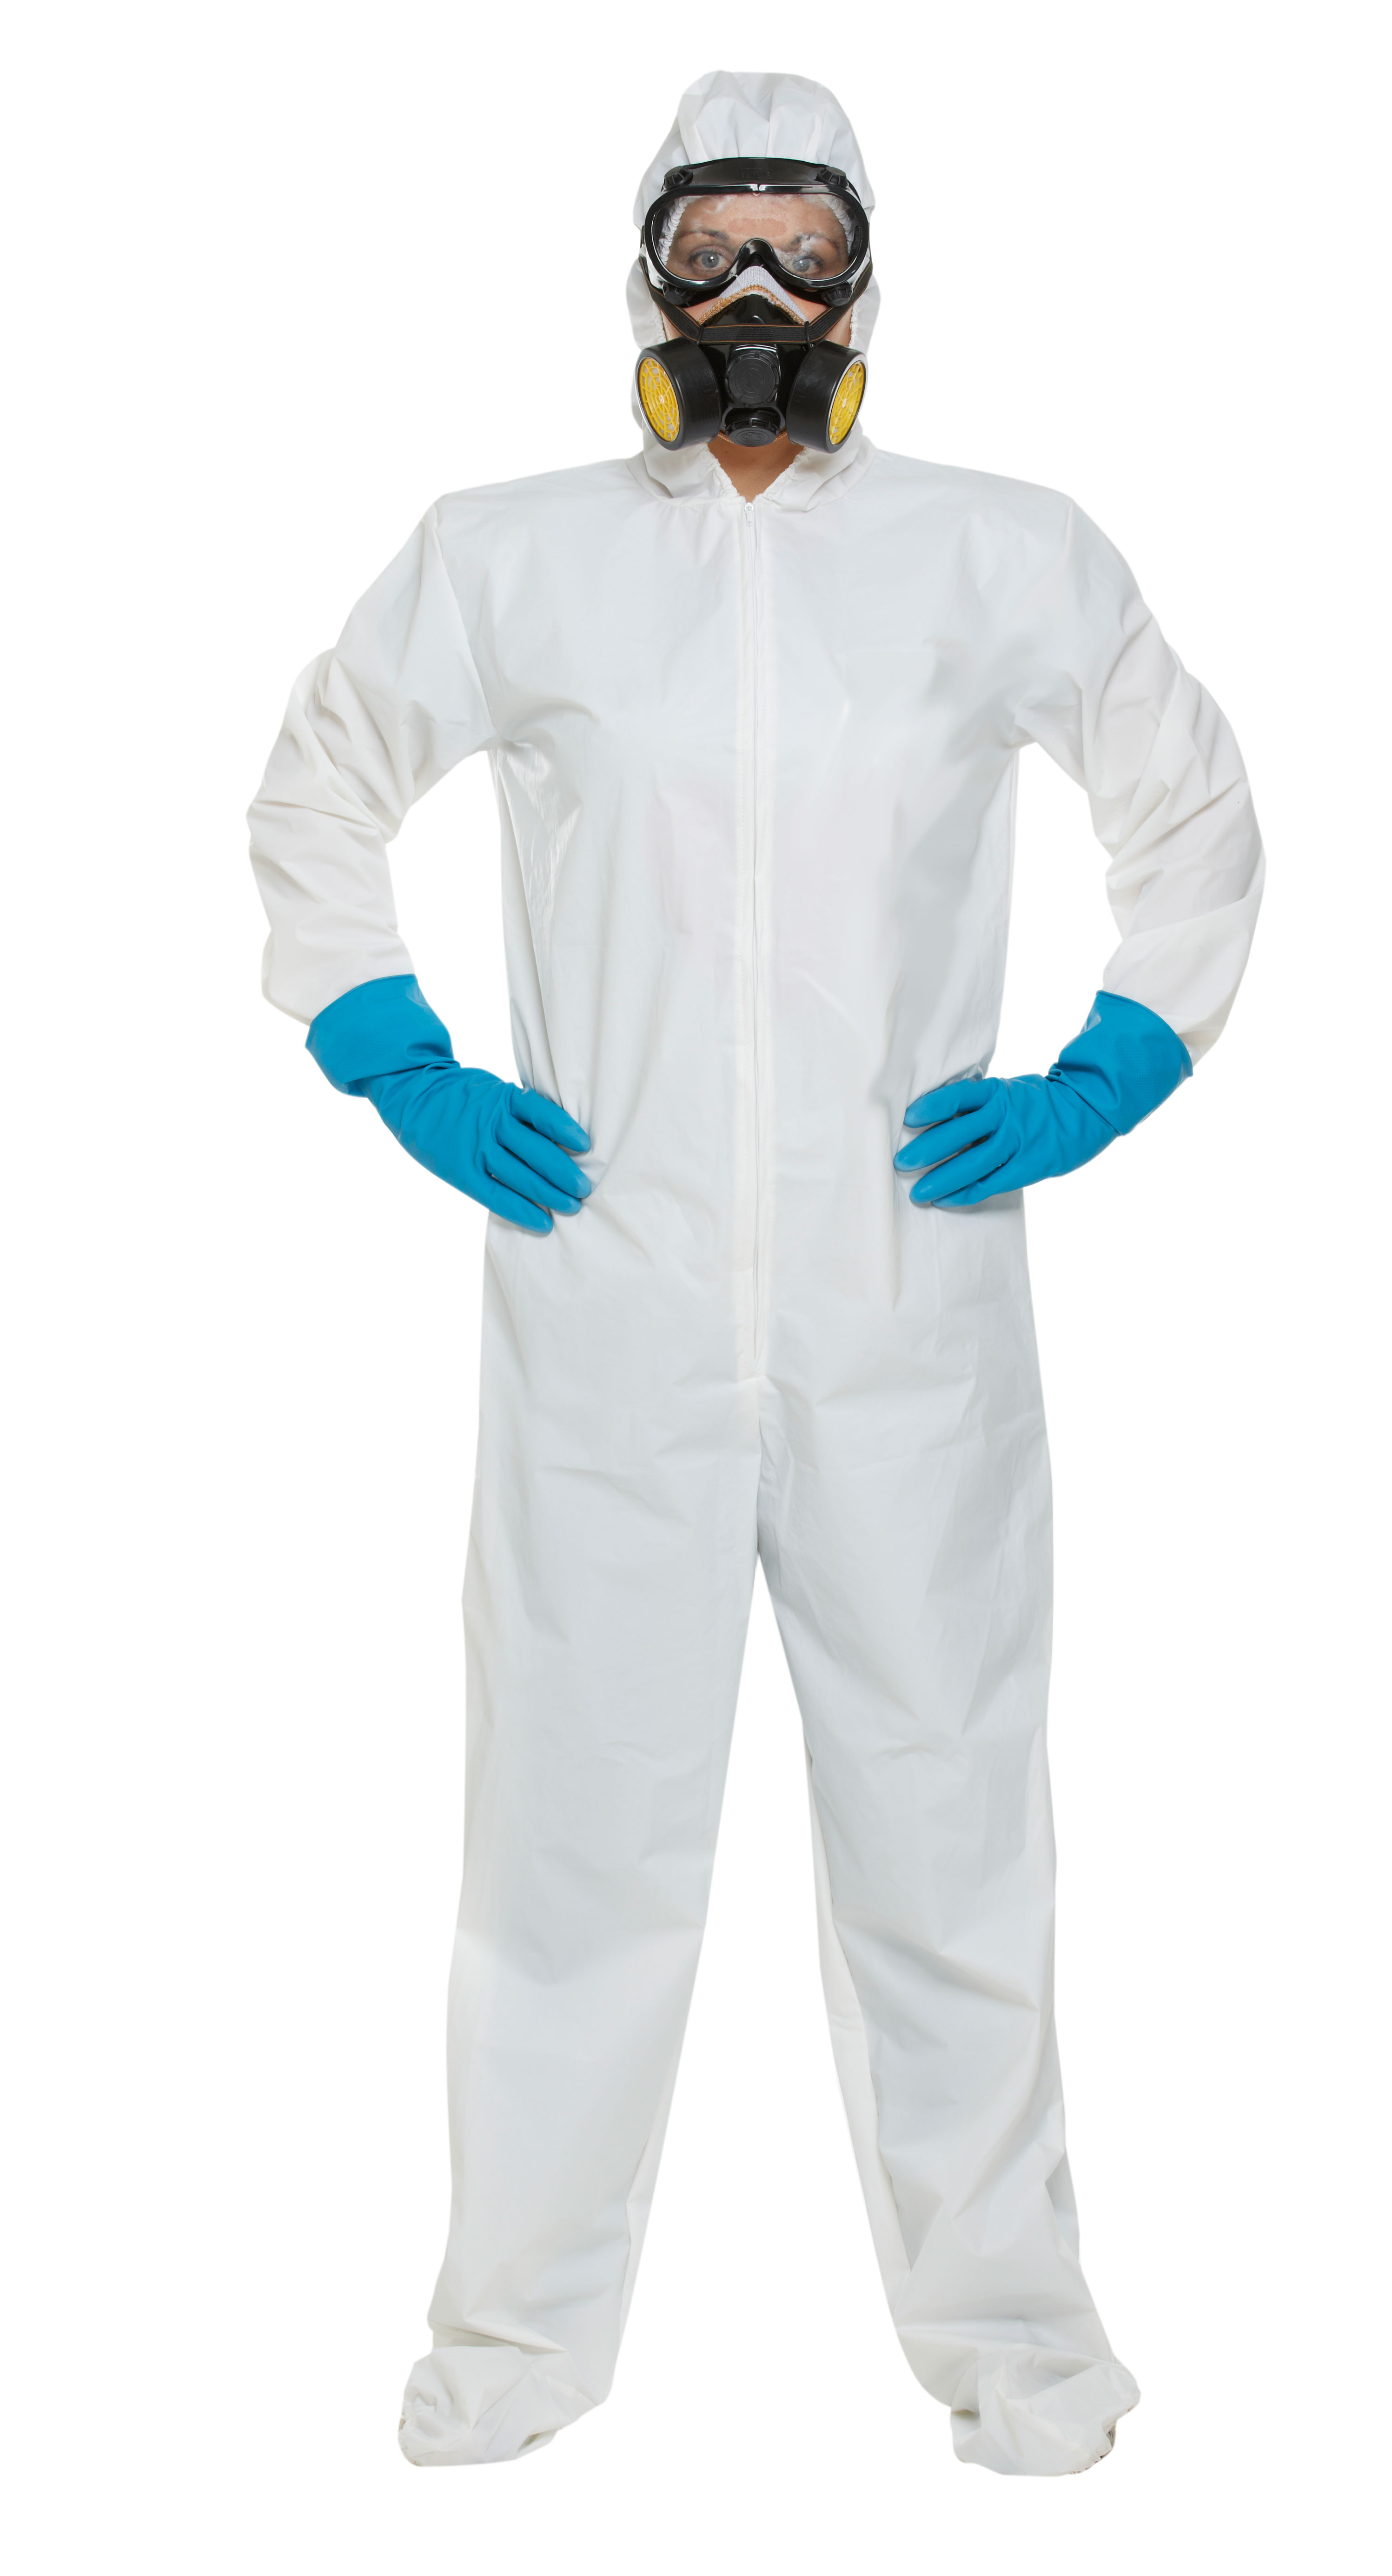 Dress Up Adult White Protective Suit Costume